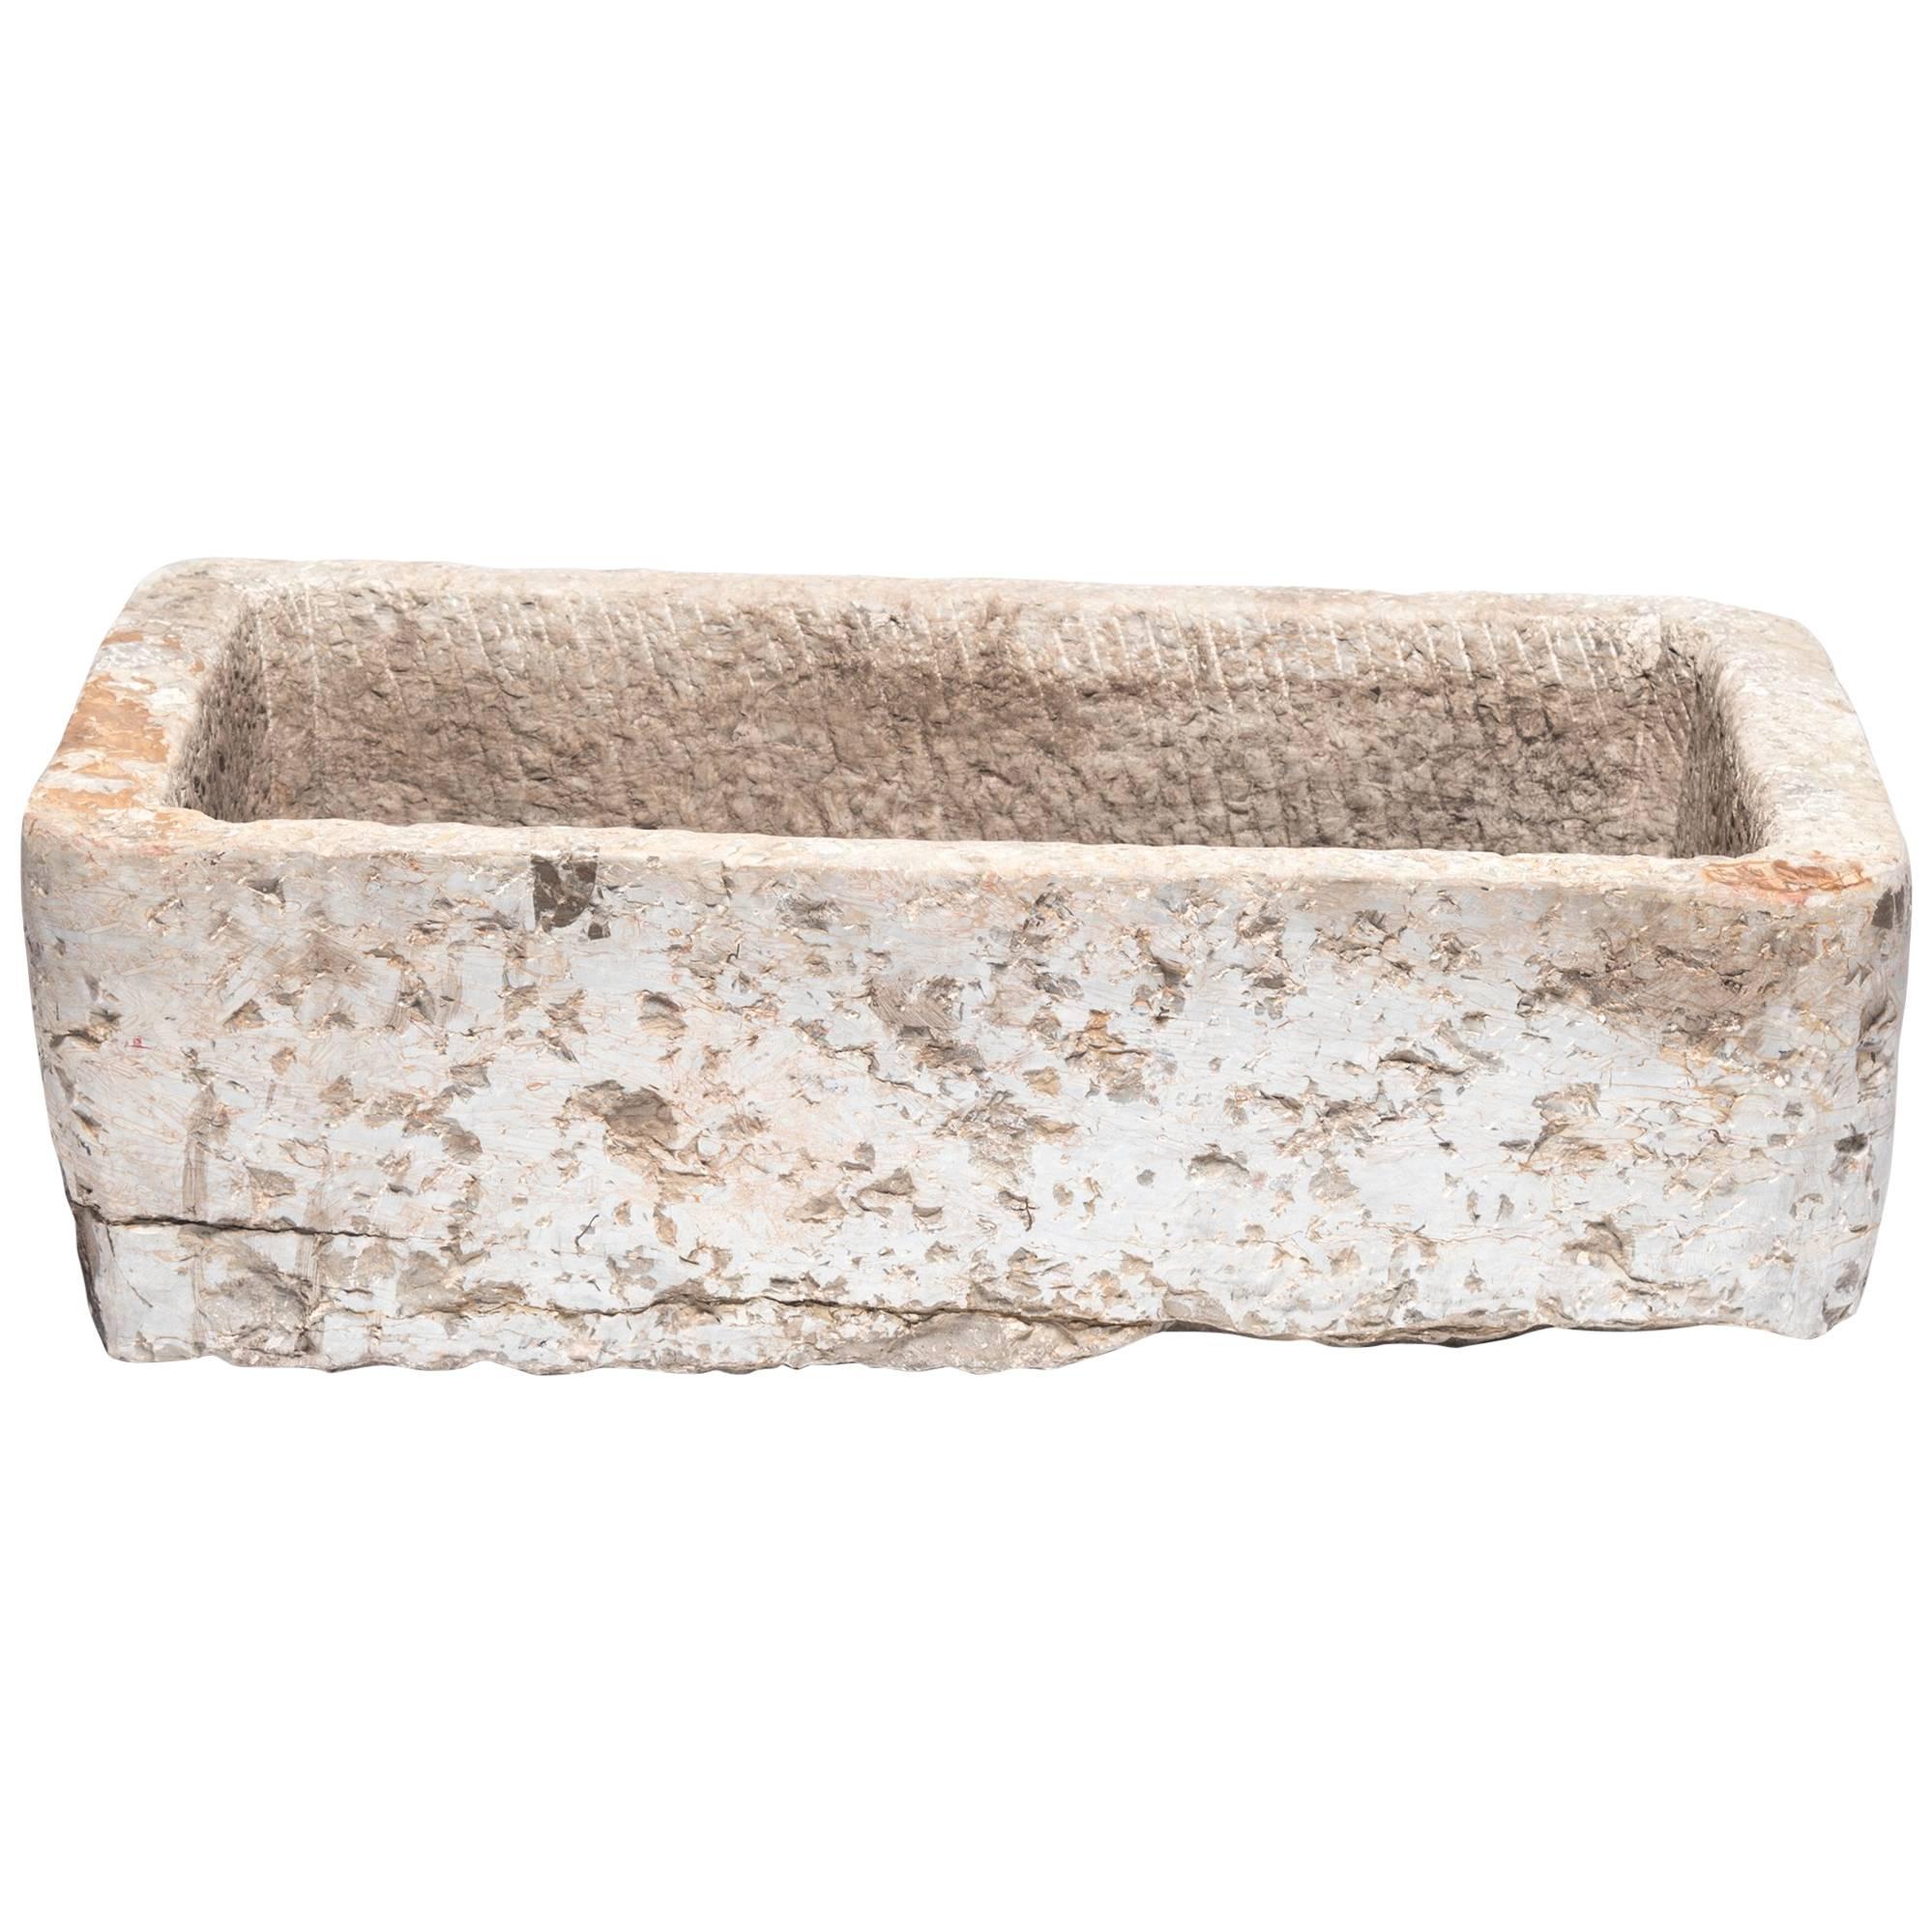 Early 20th Century Chinese Stone Trough